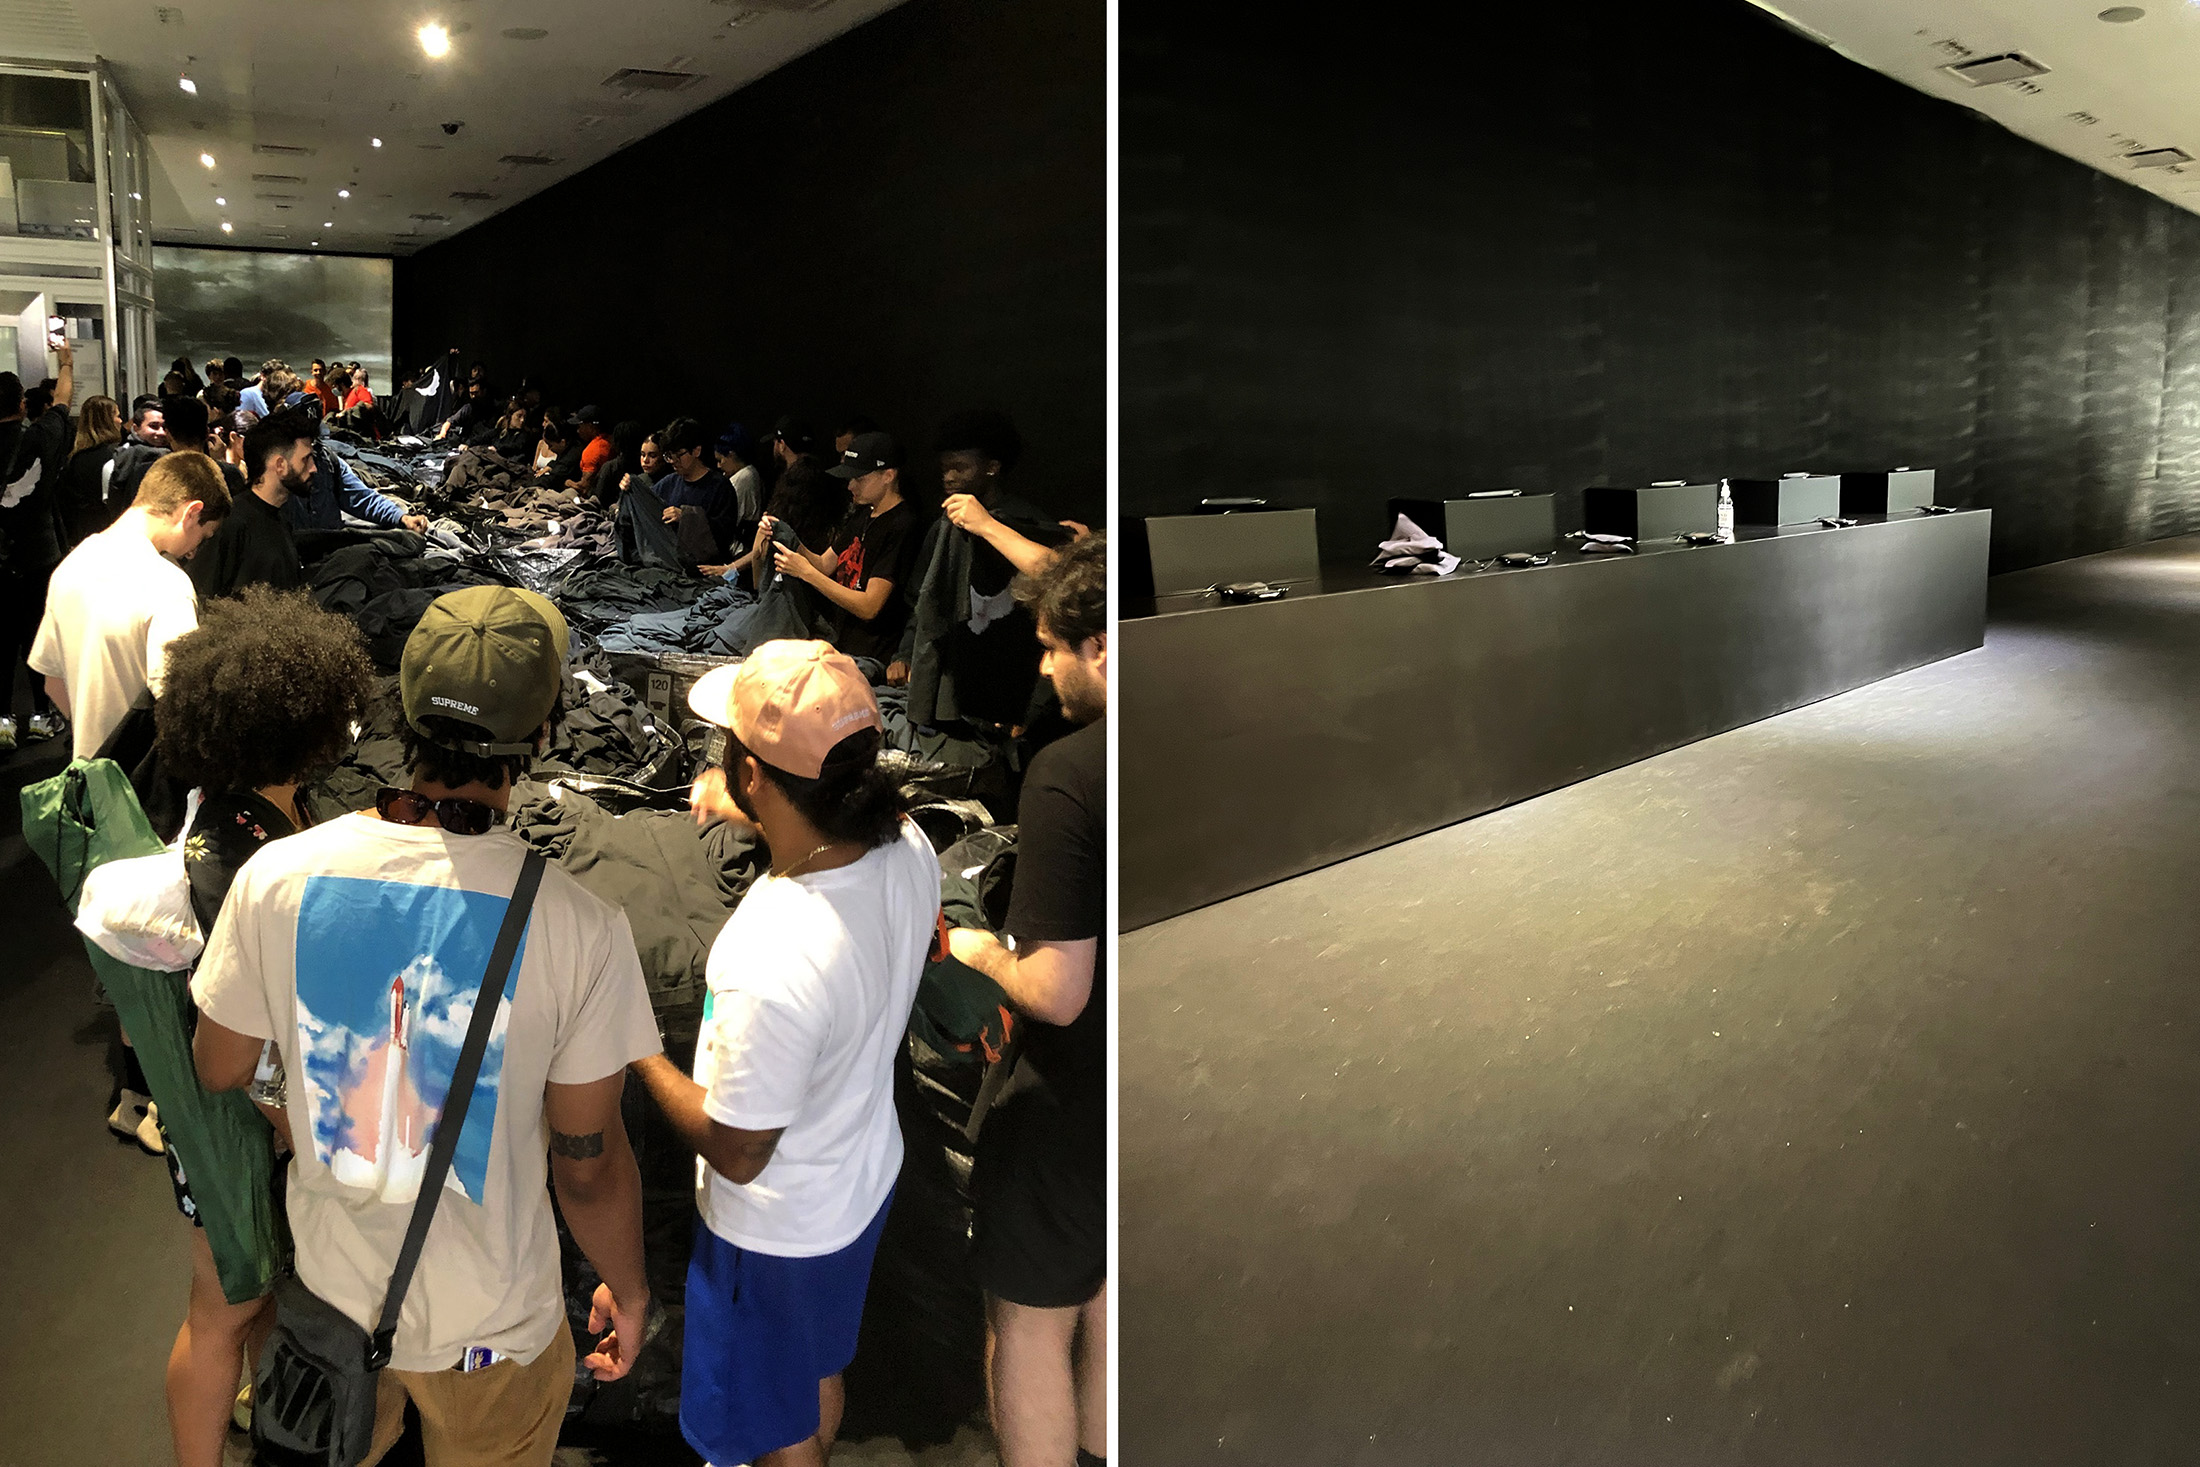 Yeezy Gap Split: NYC Times Square Store Packs Up Items for Unknown